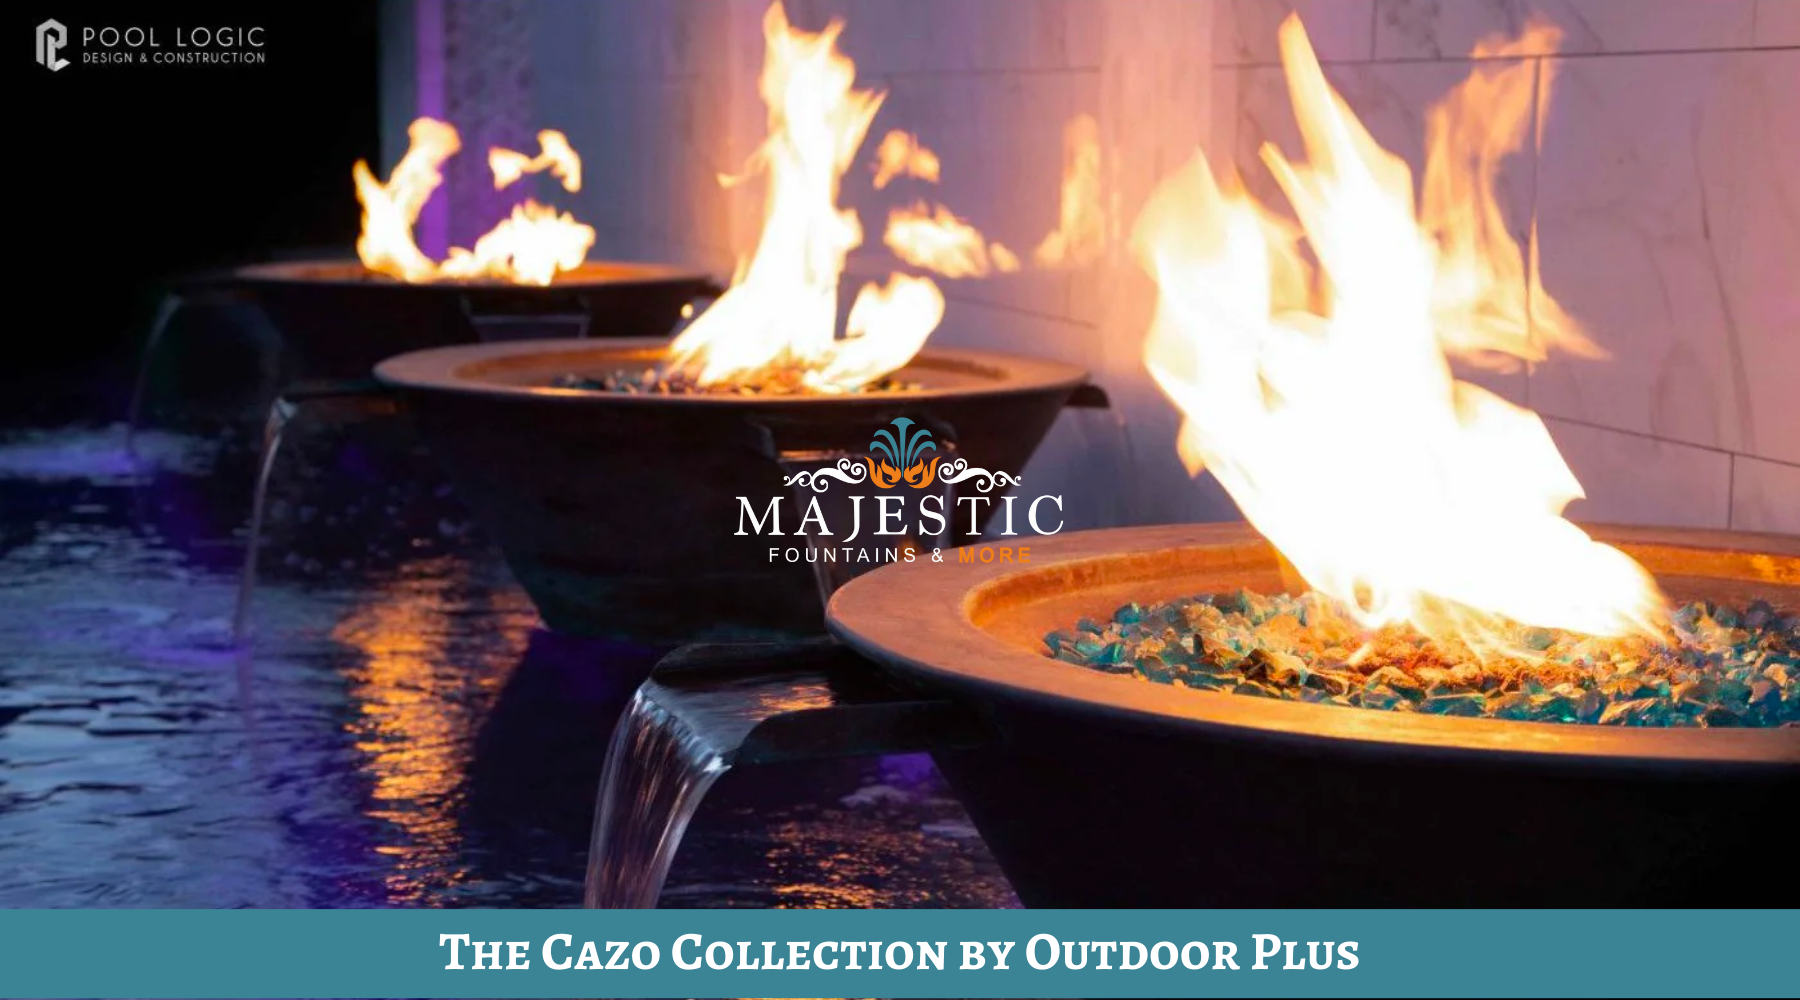 The Cazo Collection by Outdoor Plus